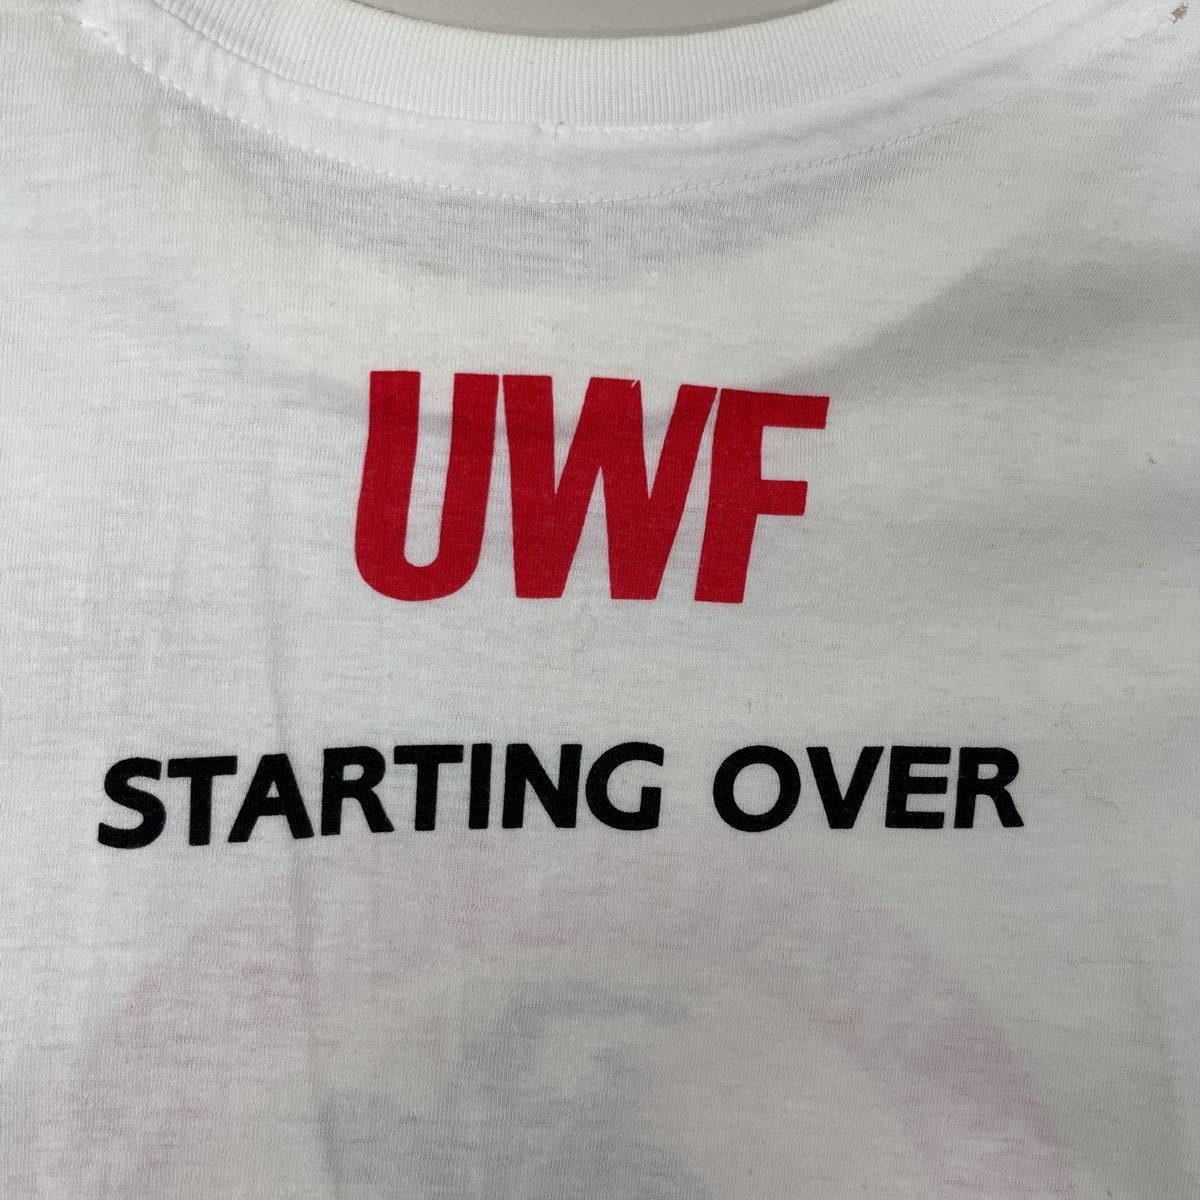  T-shirt UWF flag .. memory T-shirt Professional Wrestling combative sports front rice field day Akira takada .. Sapporo convention rare hard-to-find 